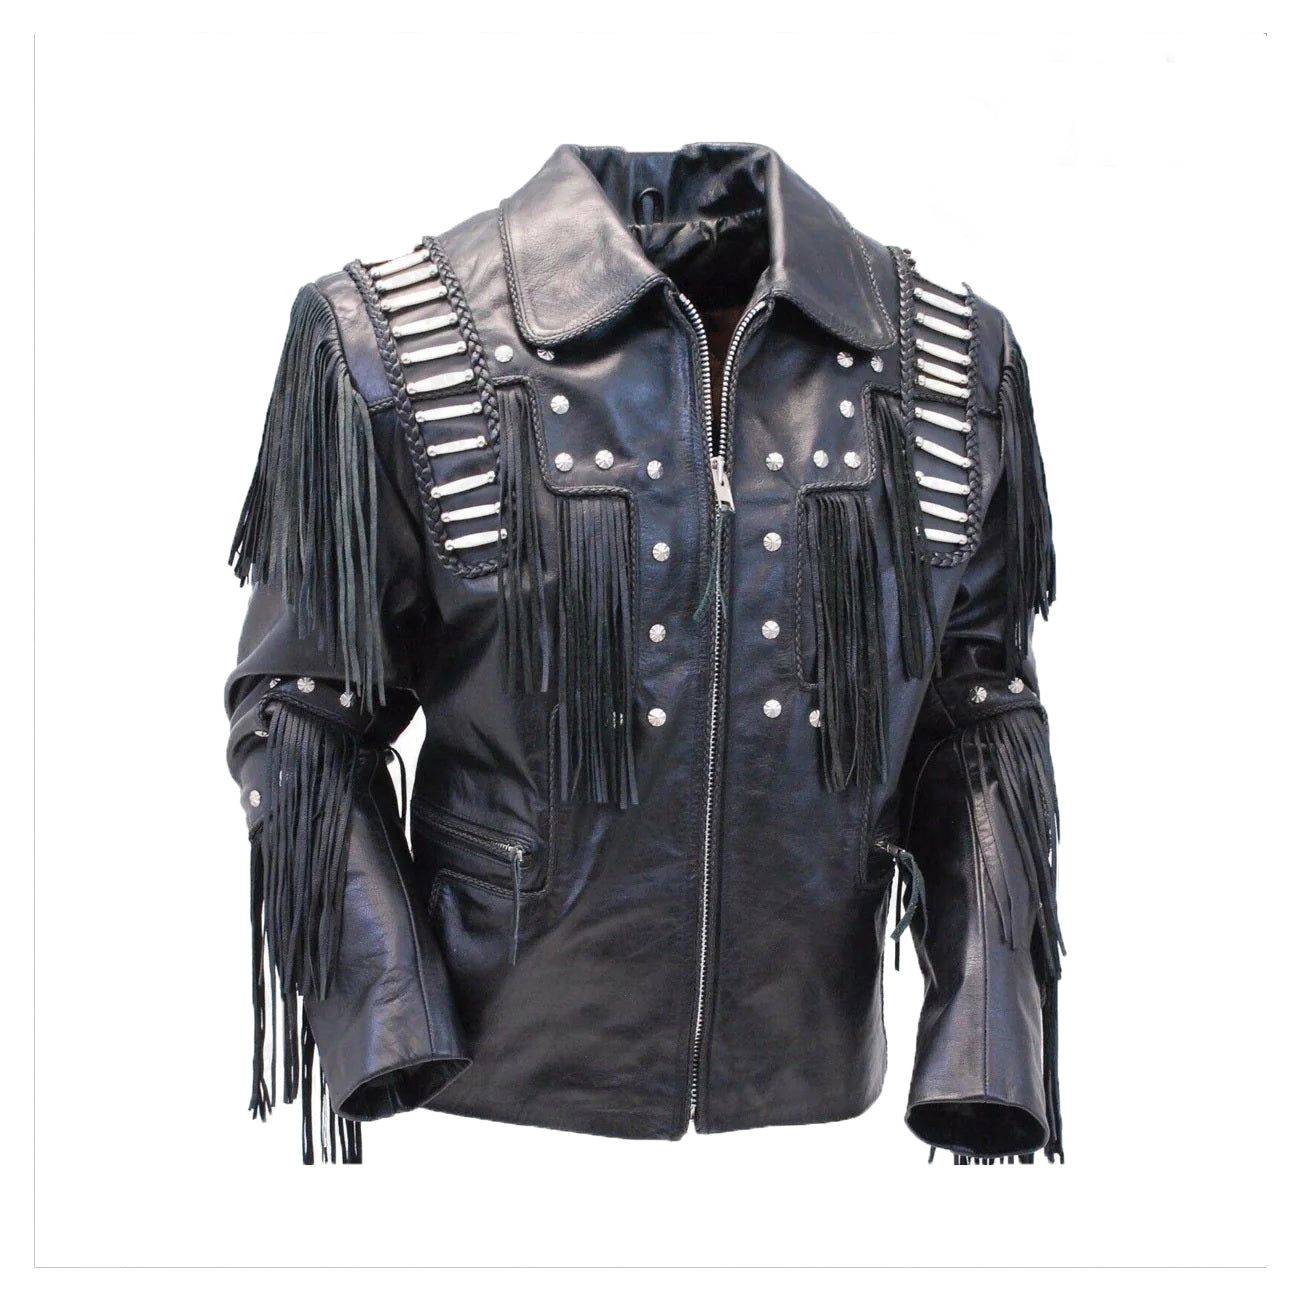 Traditional Mens Western Leather cowboy Jacket Coat With Fringe Bones and Beads